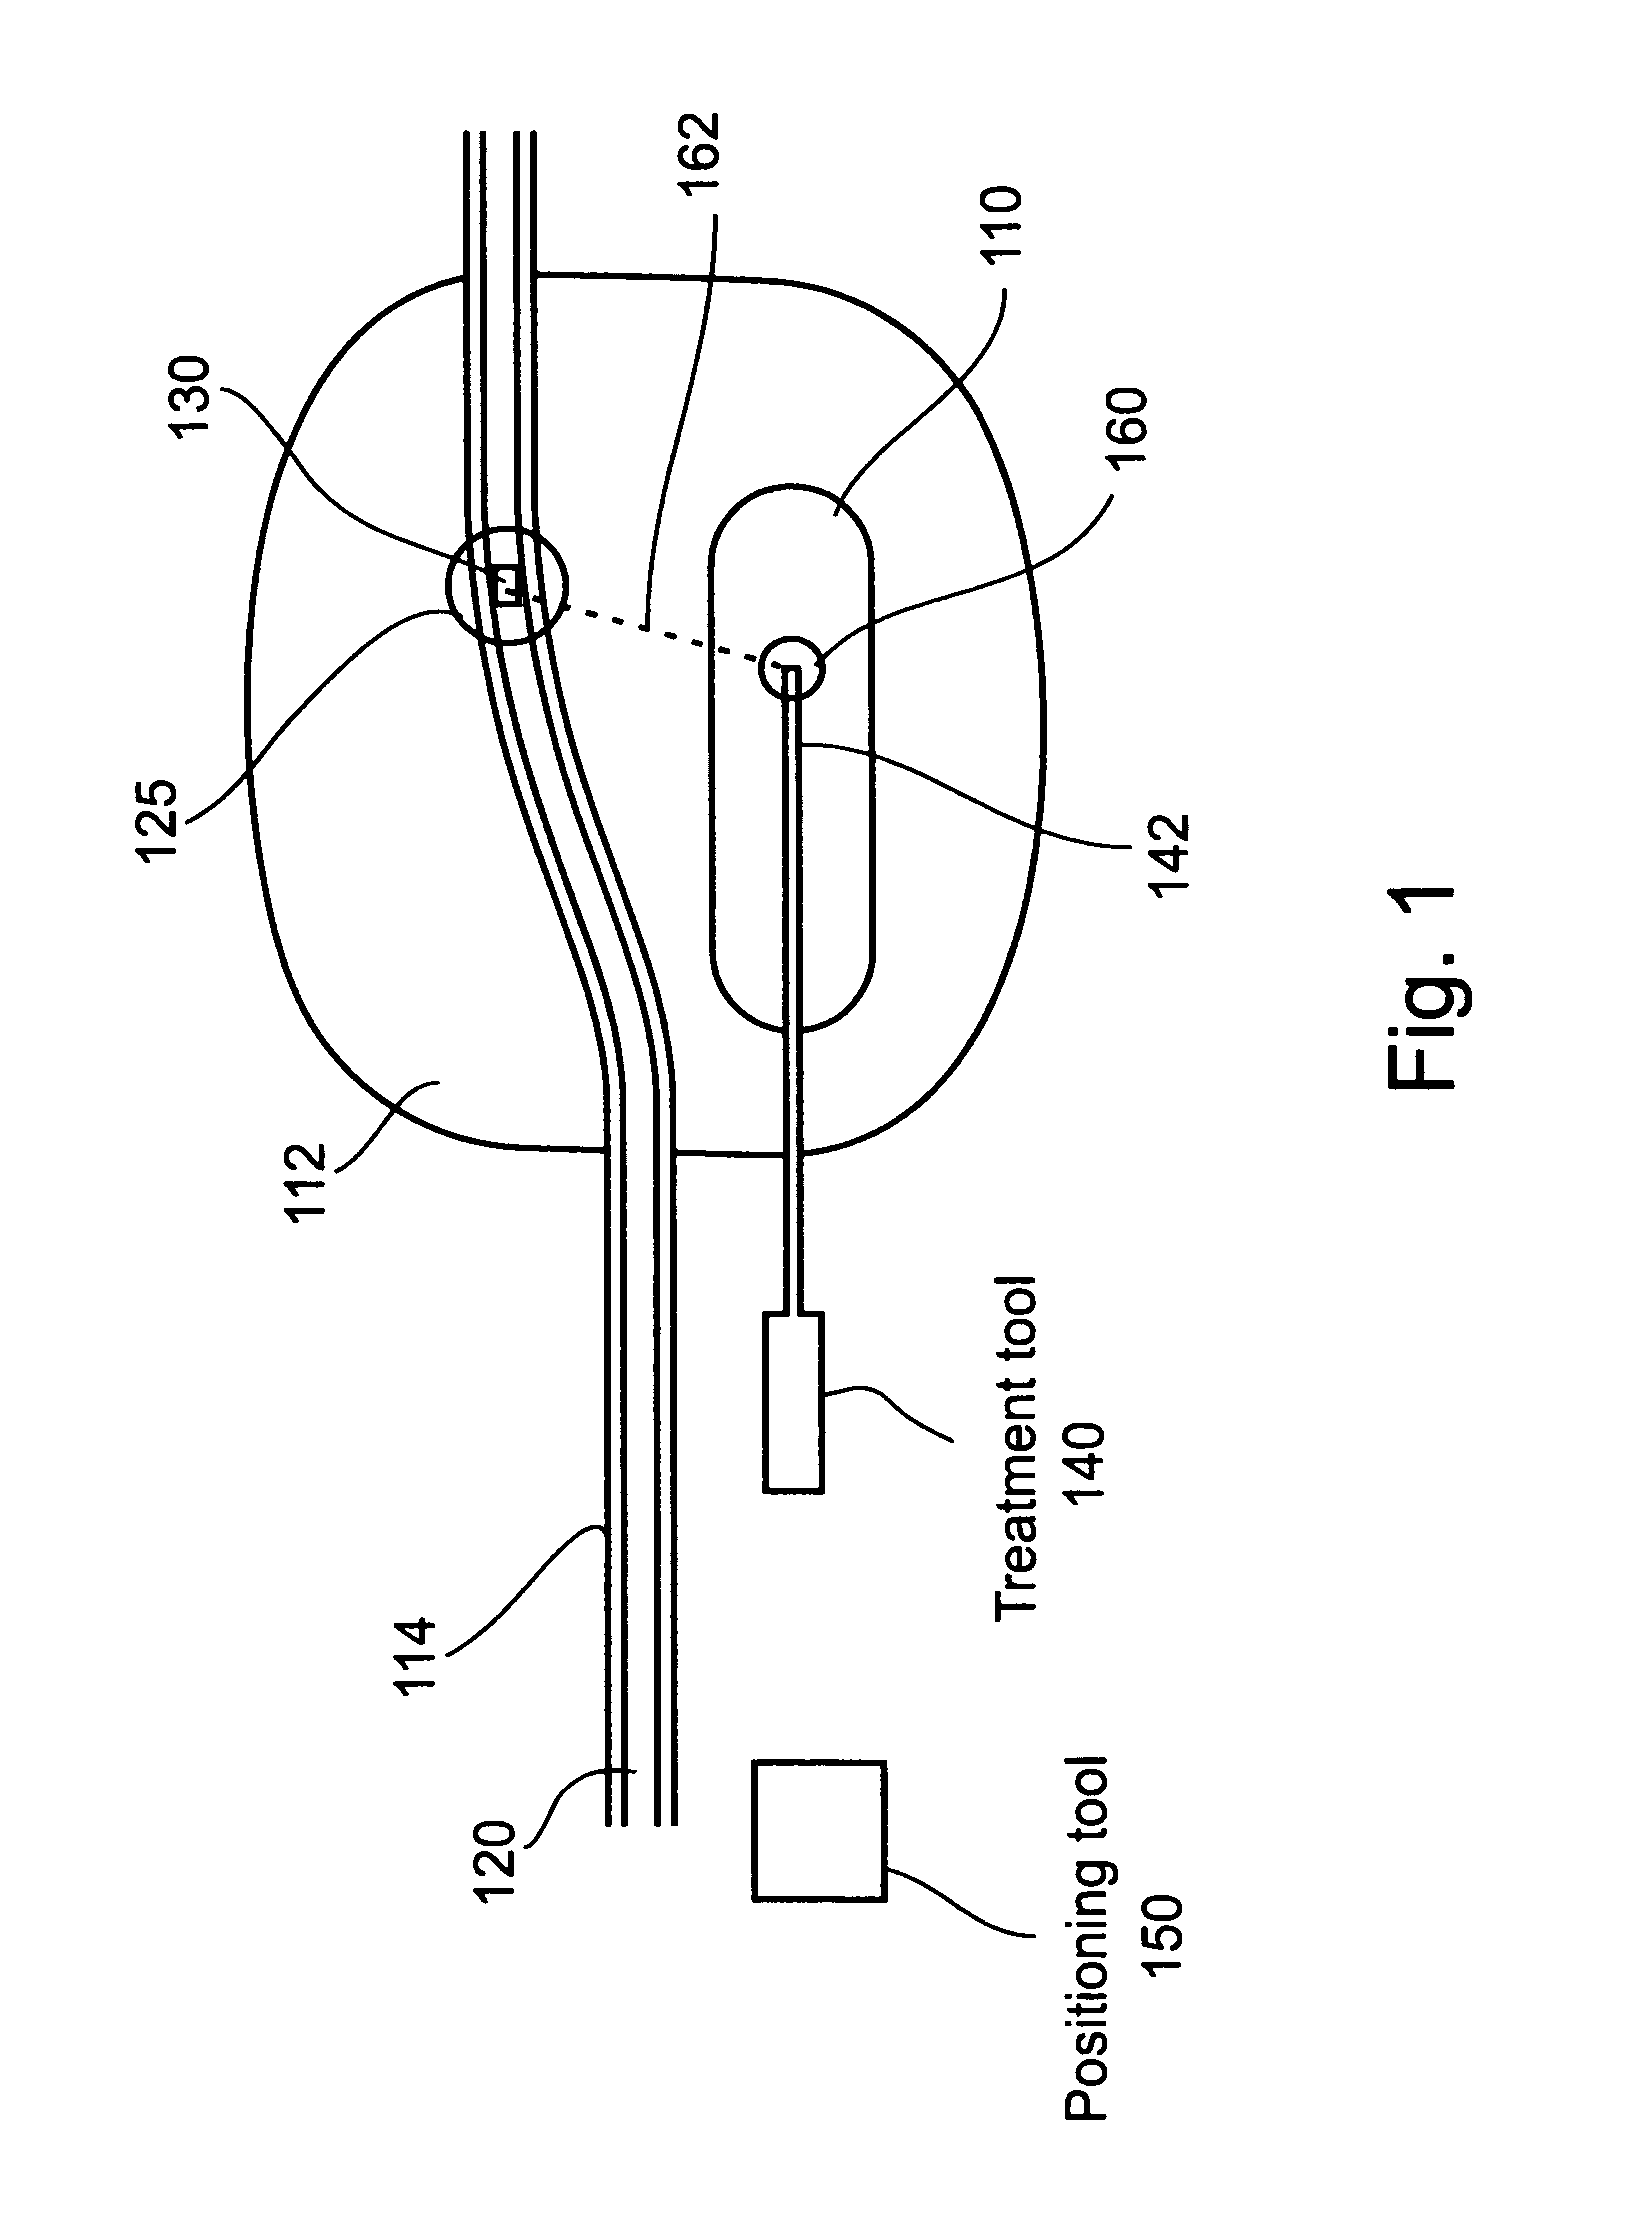 Method and apparatus for positioning a surgical instrument